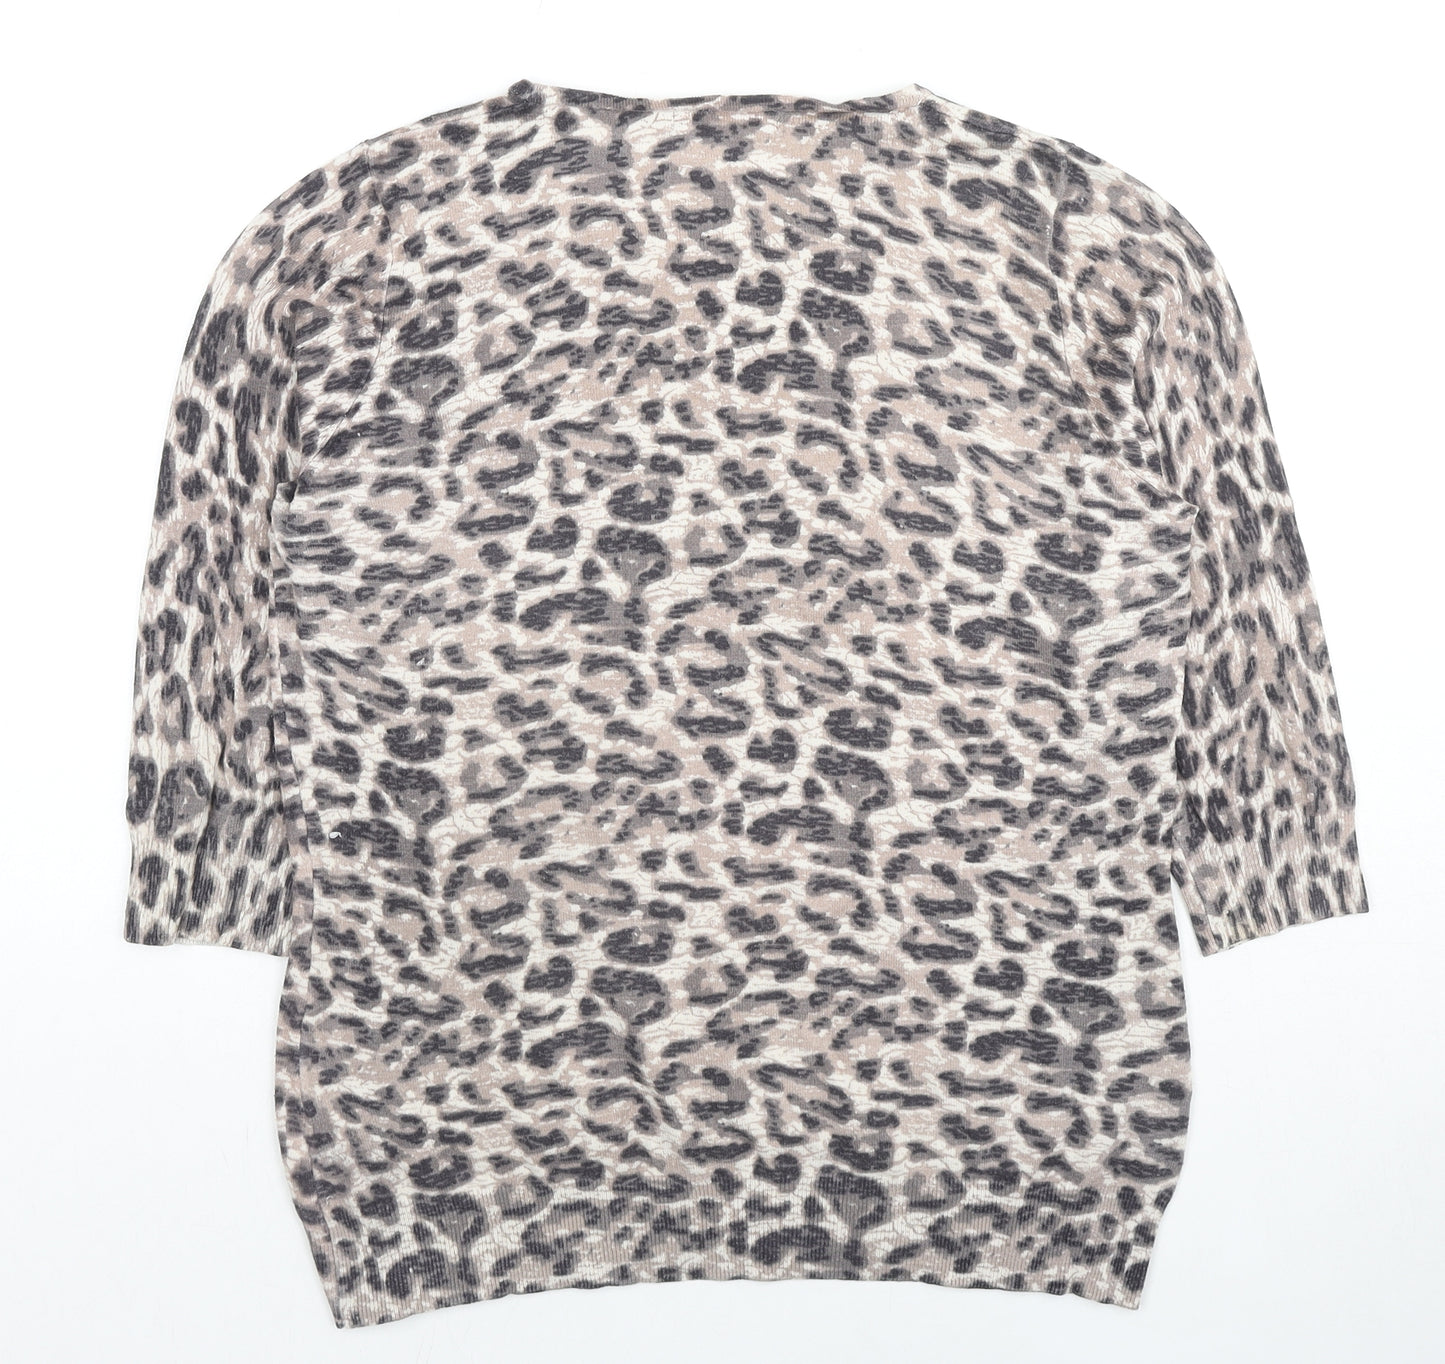 Bonmarché Womens Beige Round Neck Animal Print Polyester Pullover Jumper Size M - Leopard Print